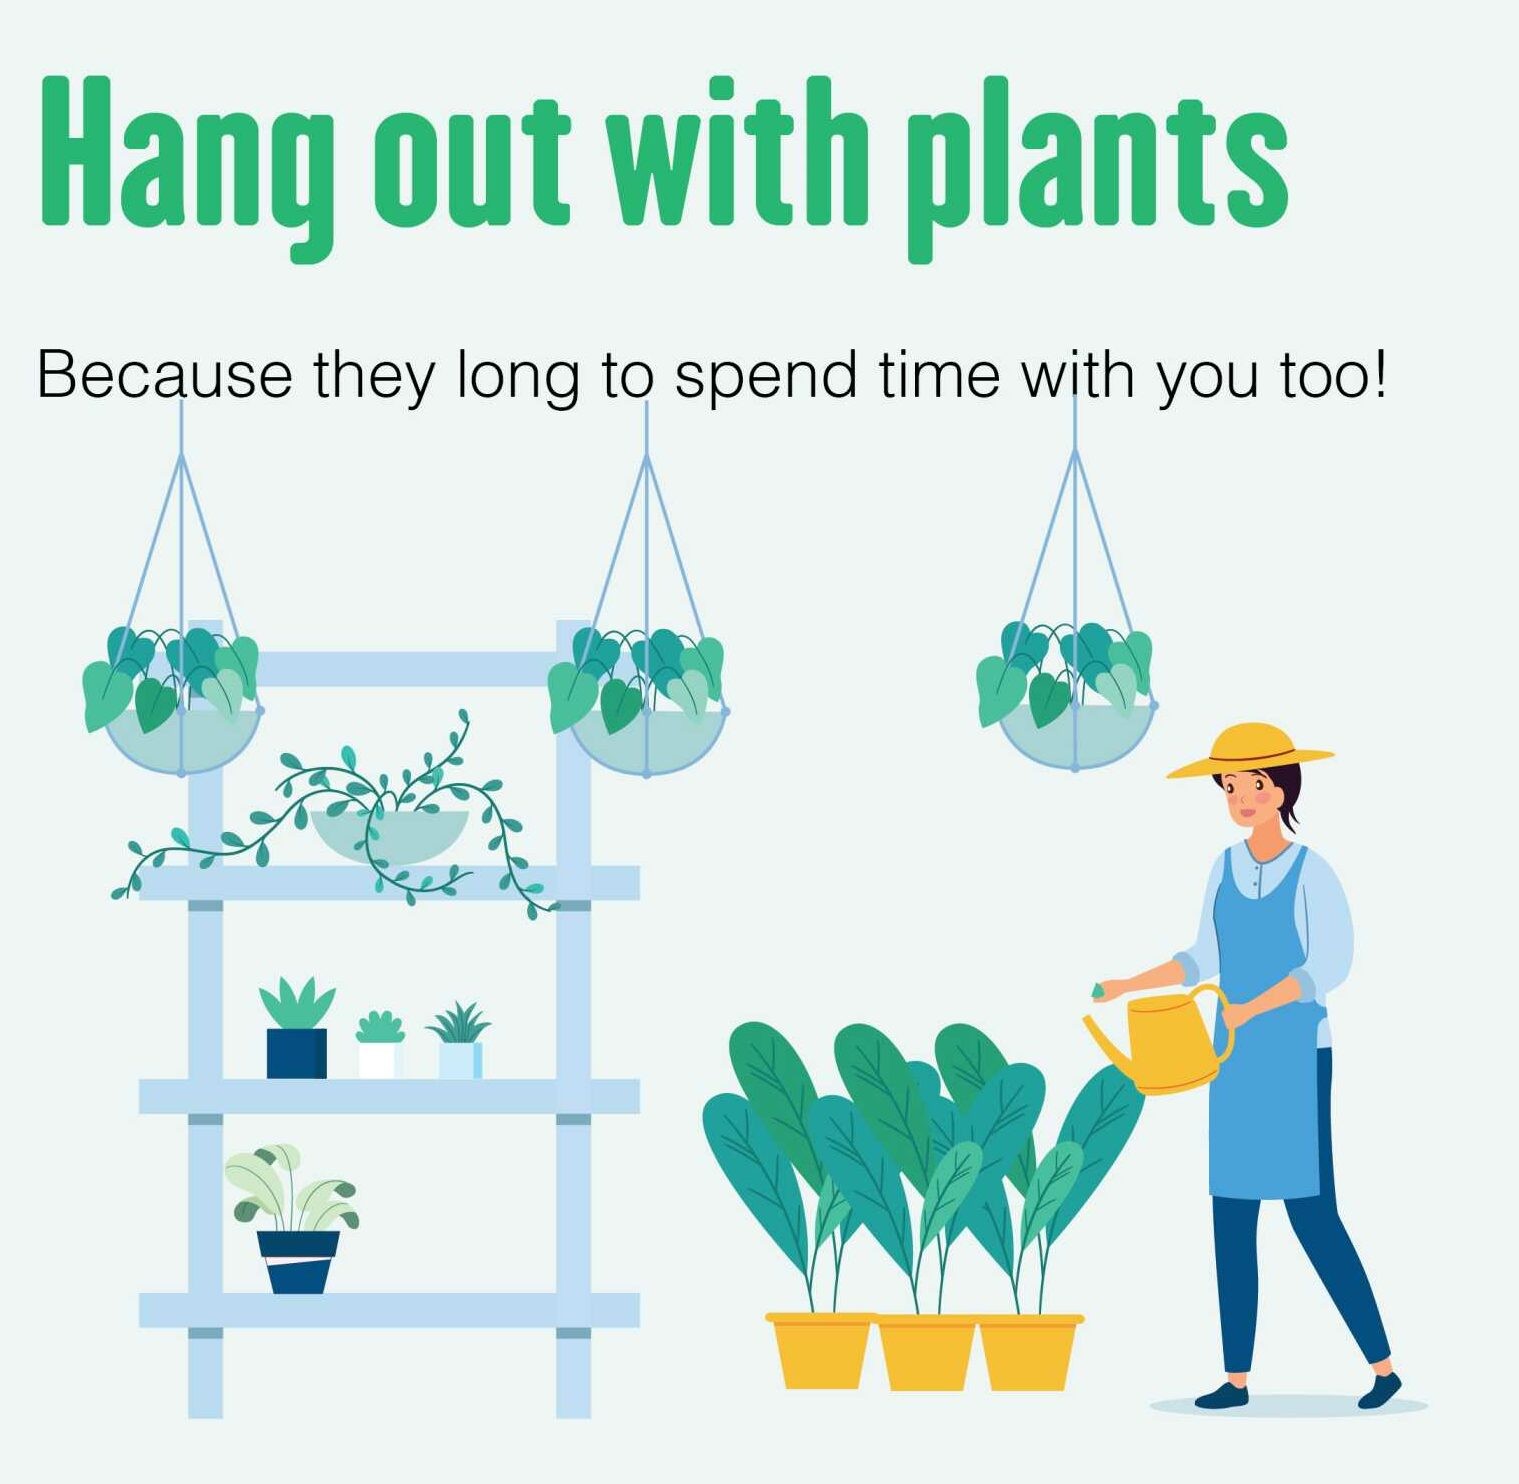 Things to do in Quarantine - hang out with plants